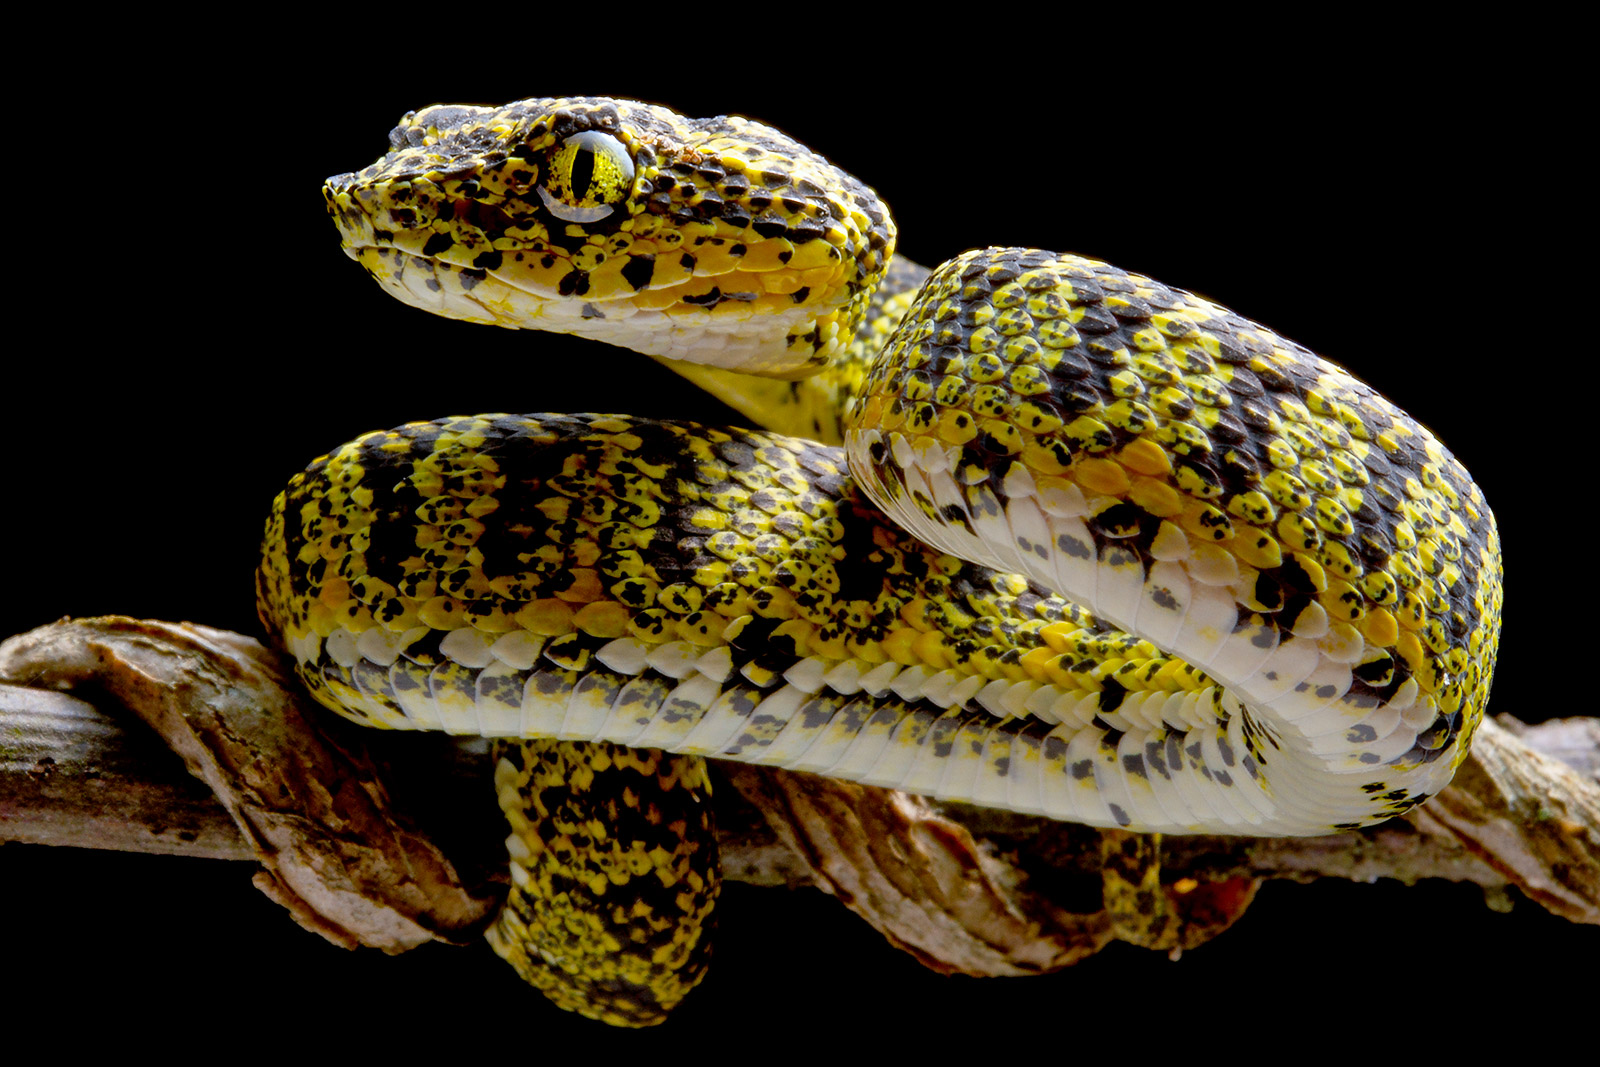 Juvenile individual of Bothriechis hussaini, coiled on a branch